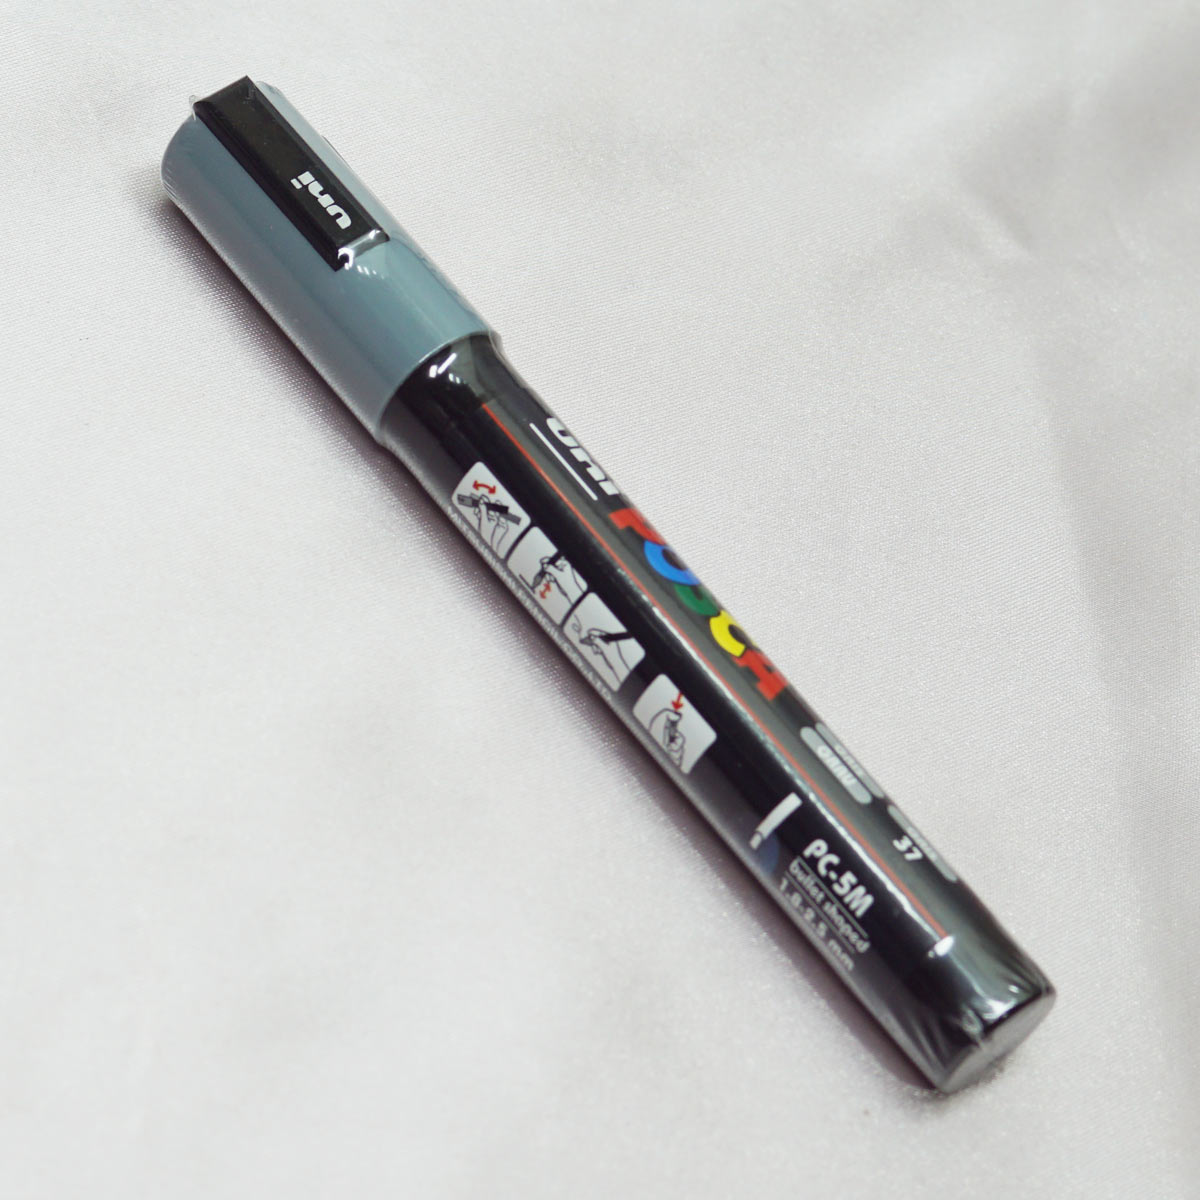 Uniball Posca PC-5M Bullet Medium Tip 1.8 - 2.5mm Opaque Grey Color and Water Based Paint Marker SKU 22480